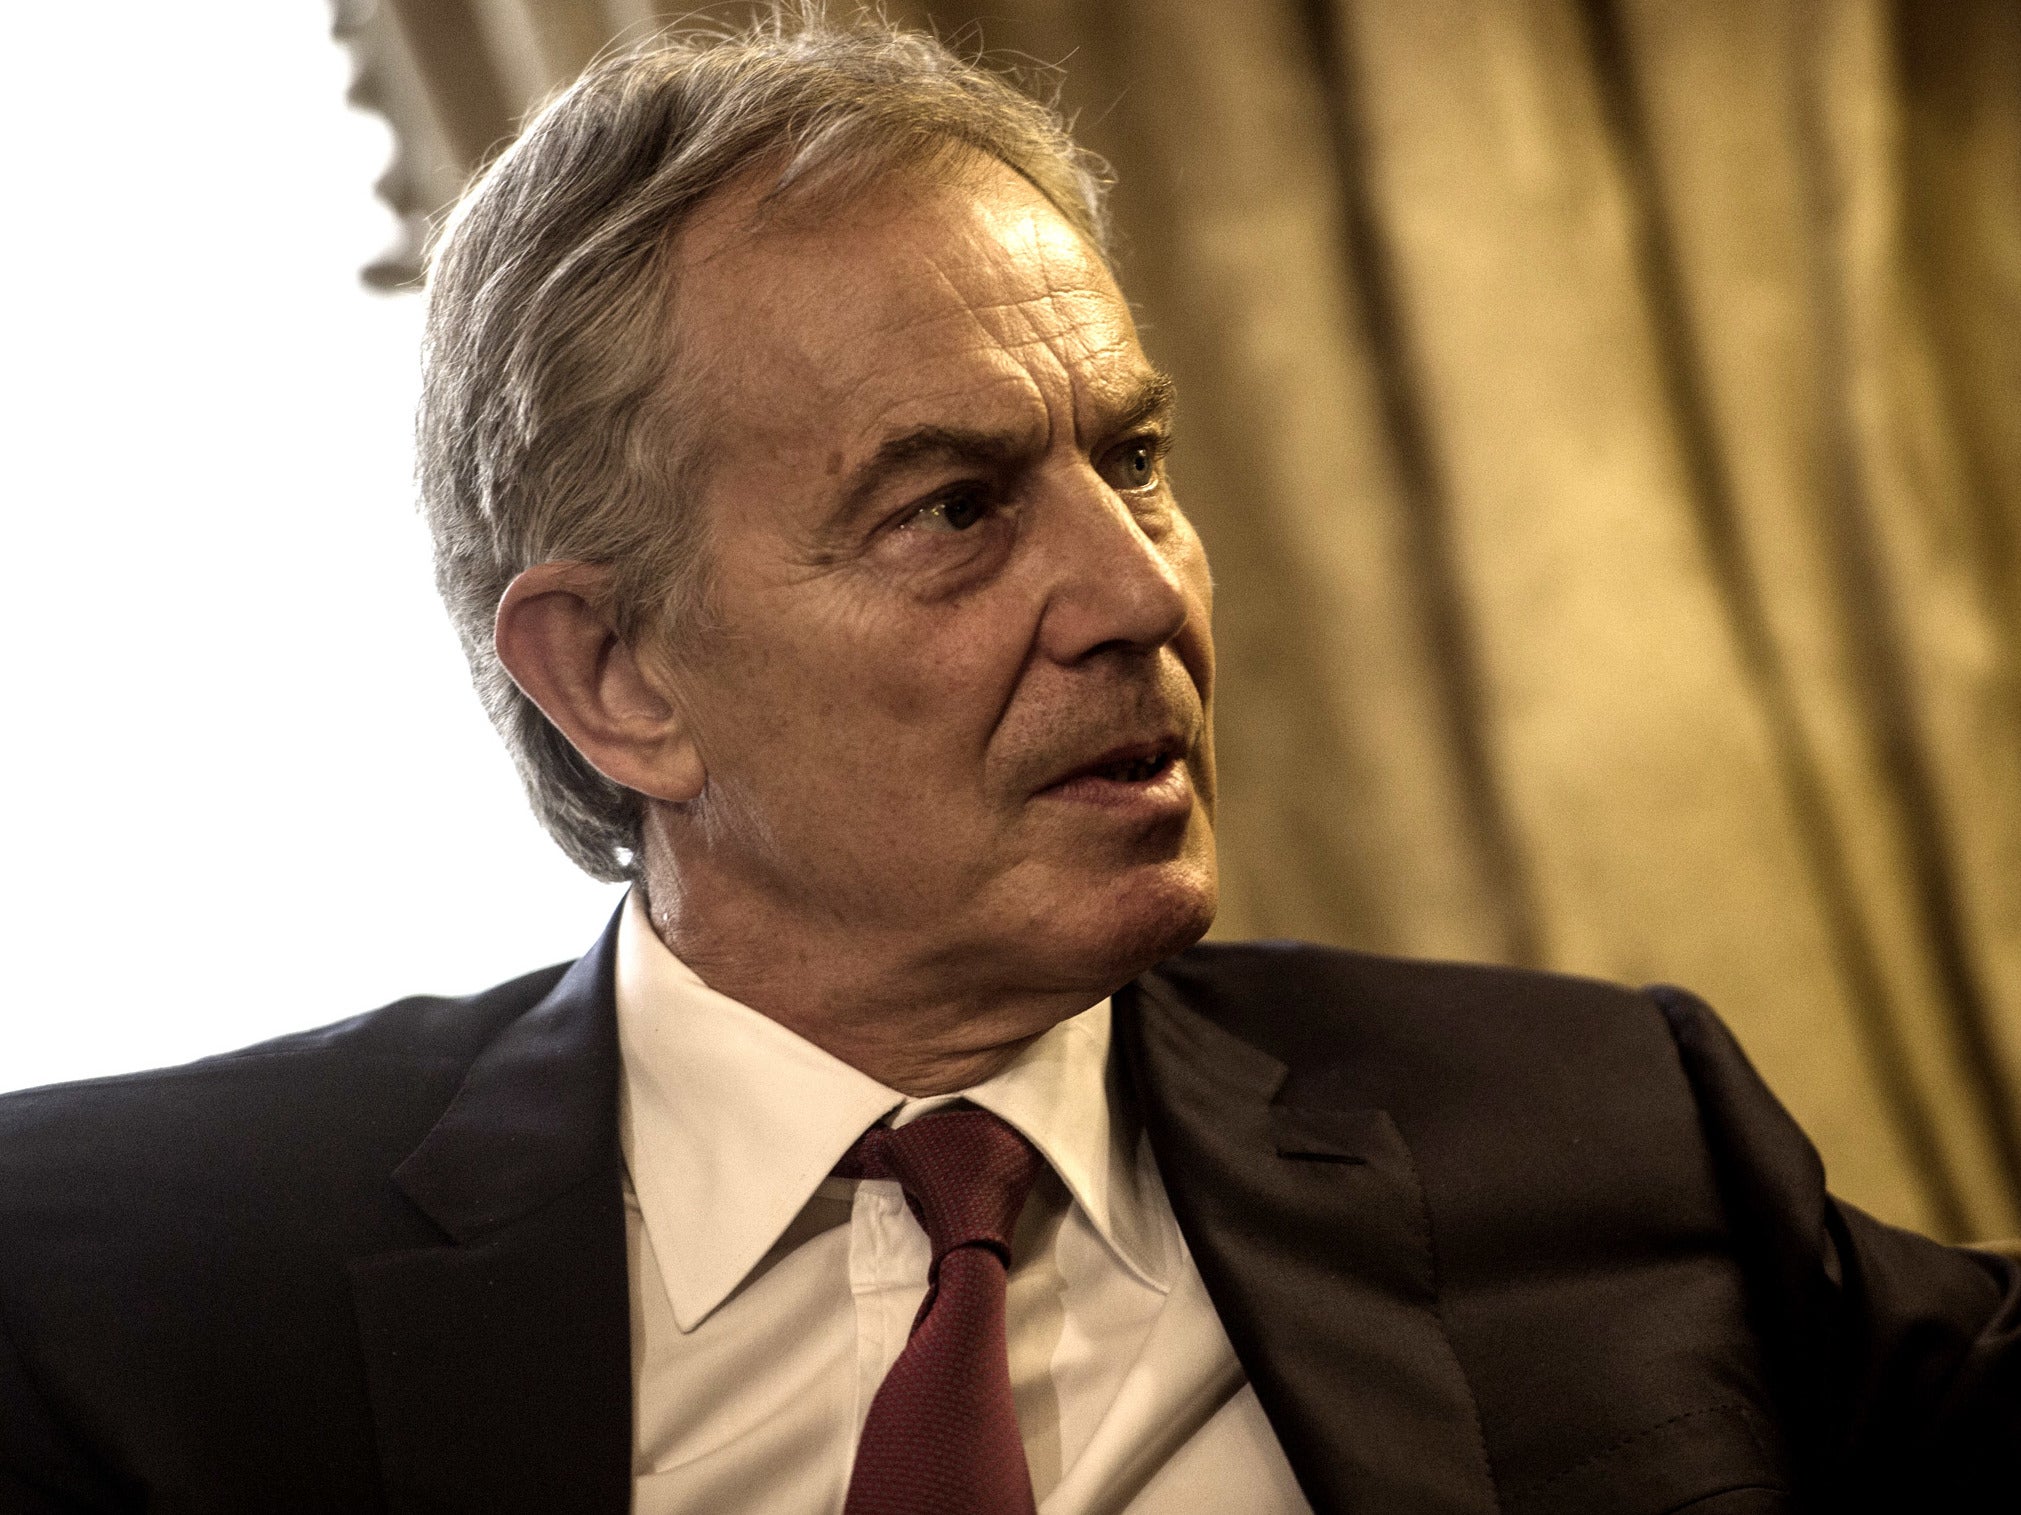 Tony Blair has offered to answer queries in writing